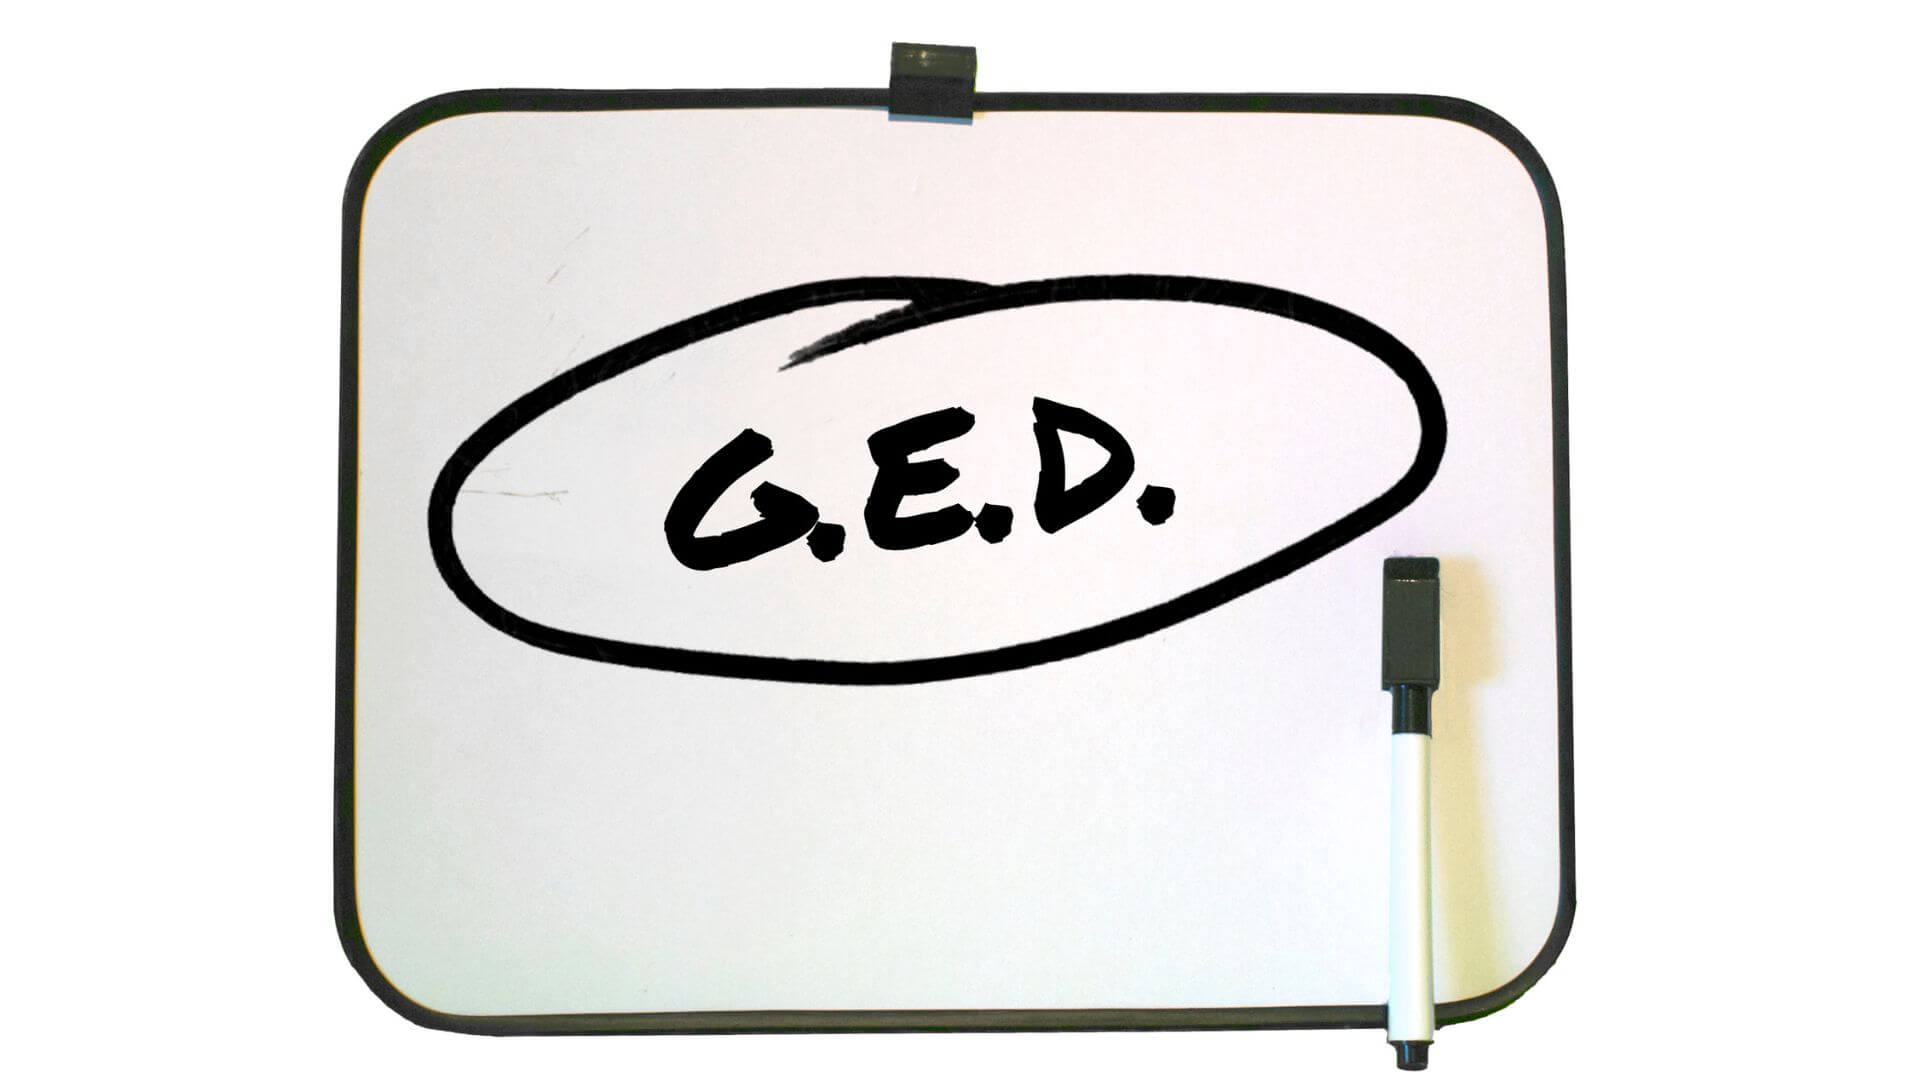 word ged written on a whiteboard with black erase marker